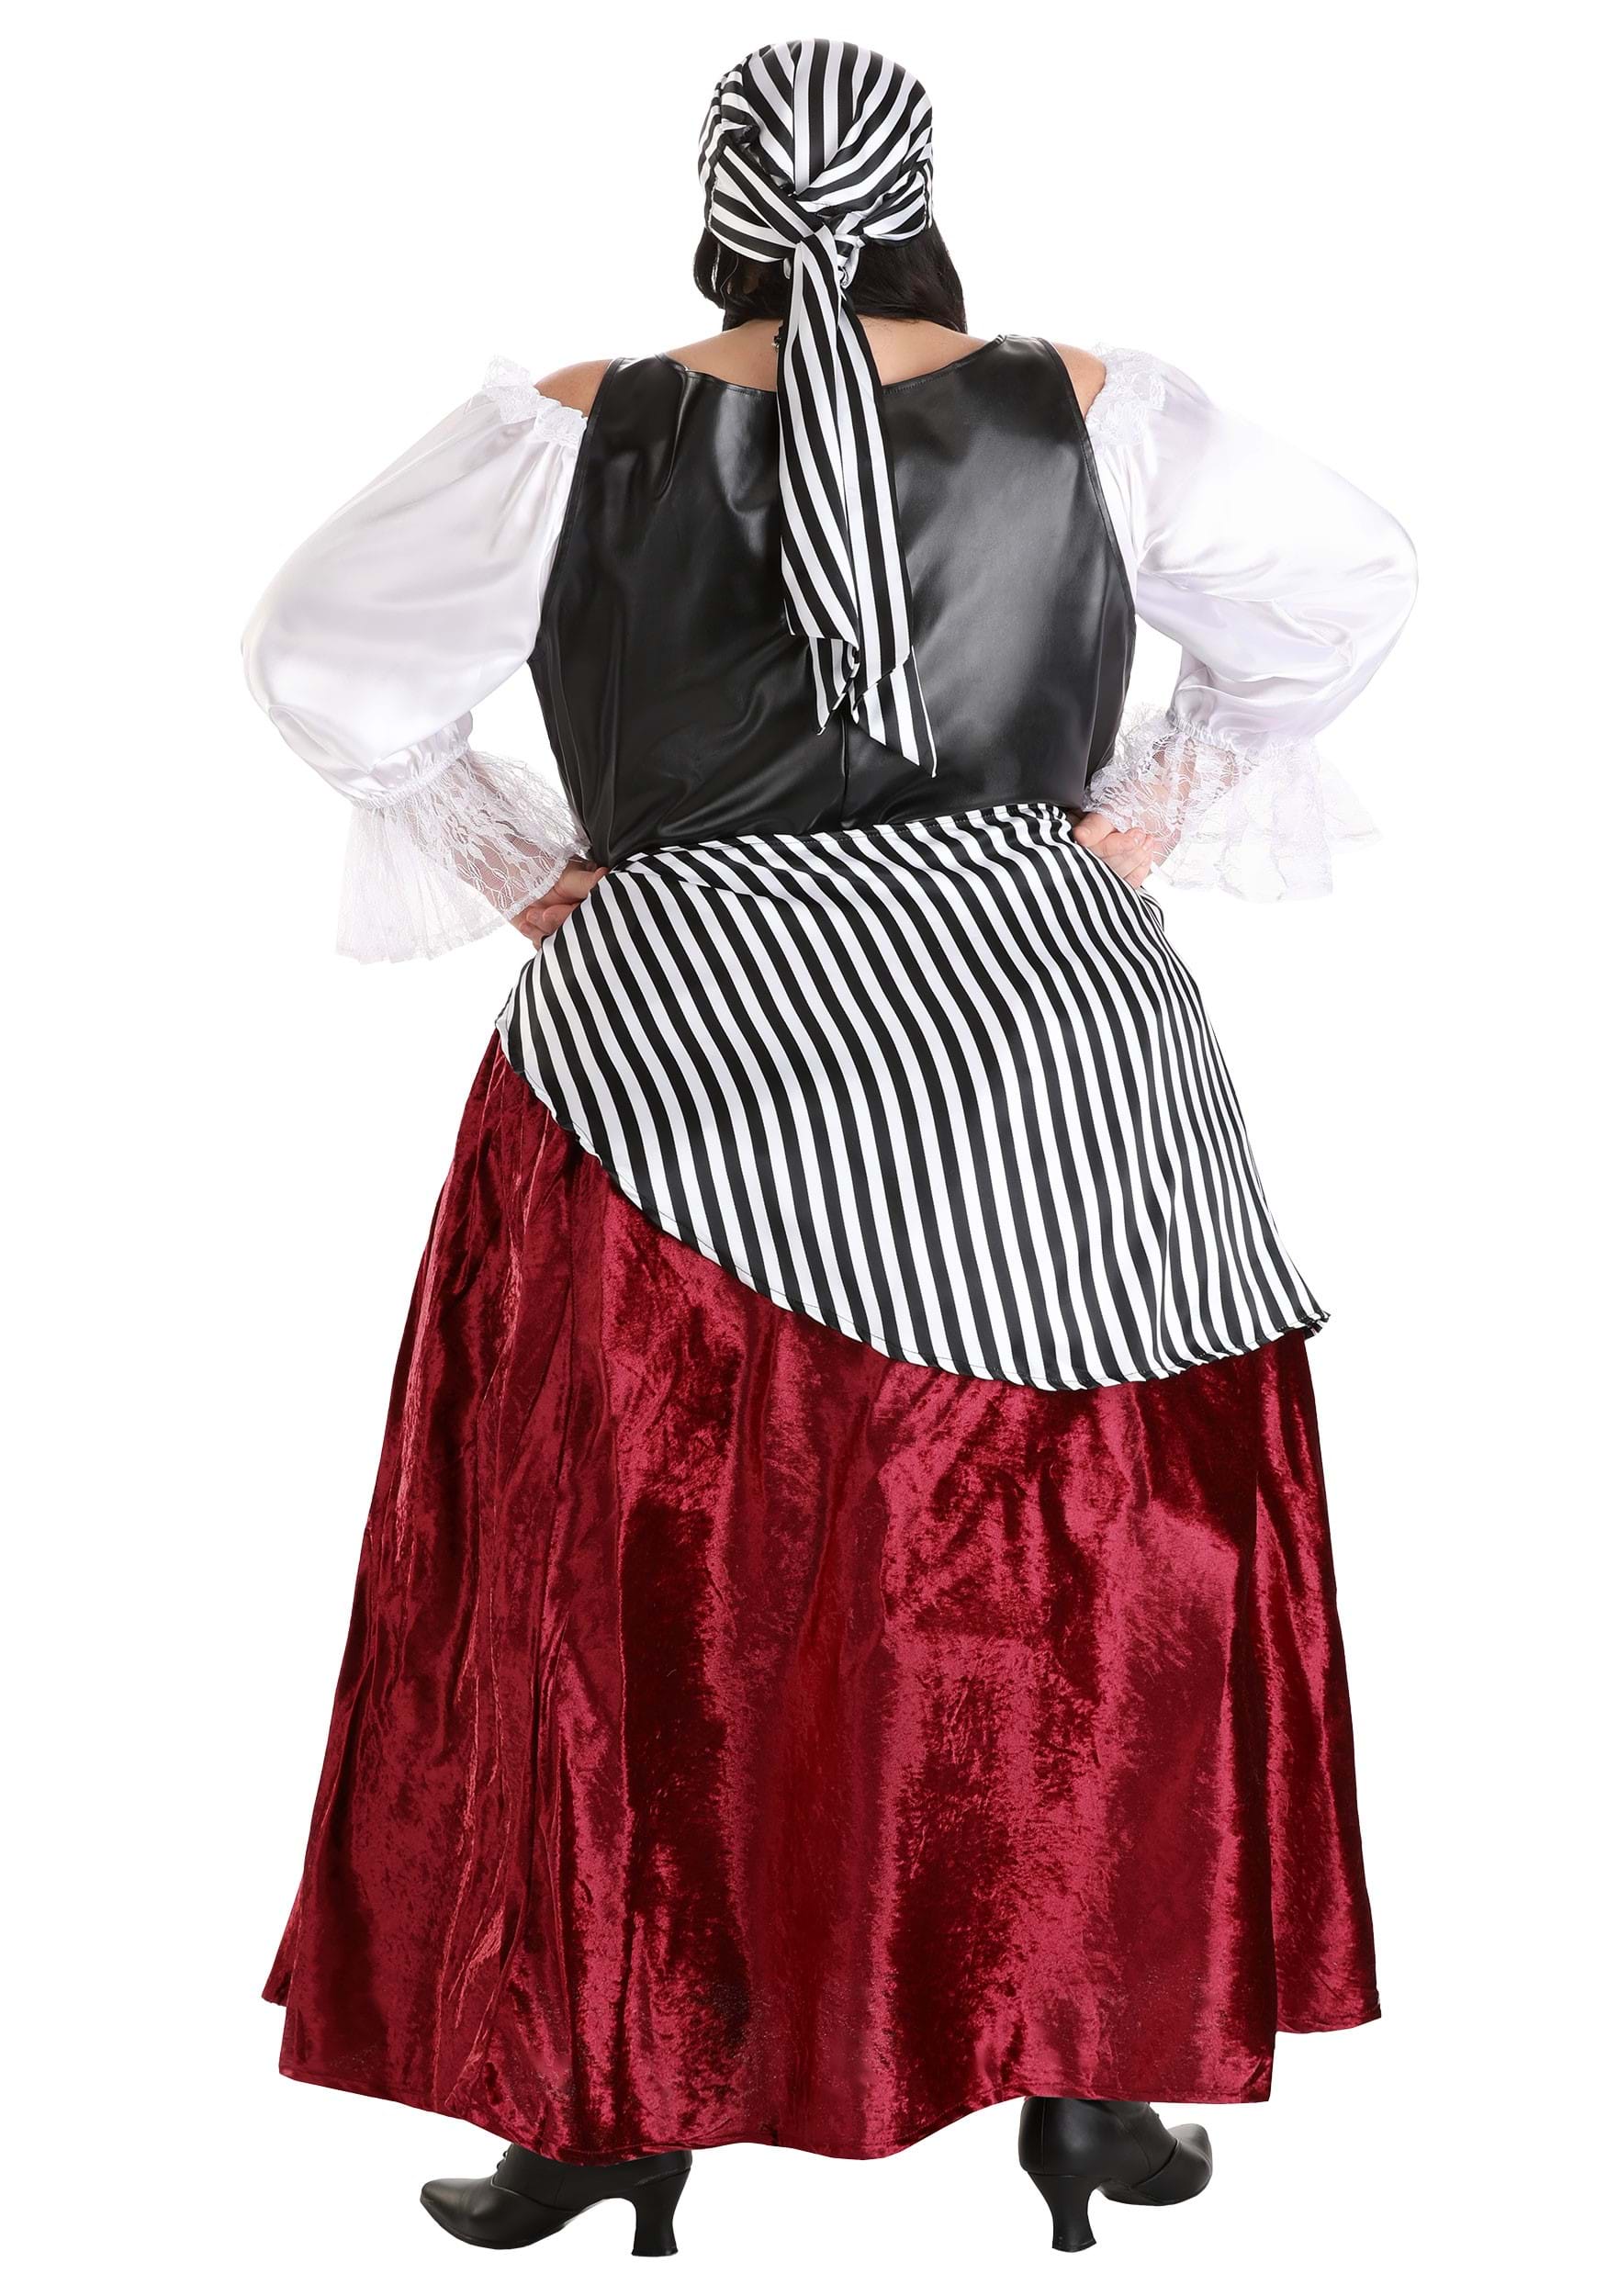 Plus Size Deluxe Pirate Wench Costume , Pirate Dress